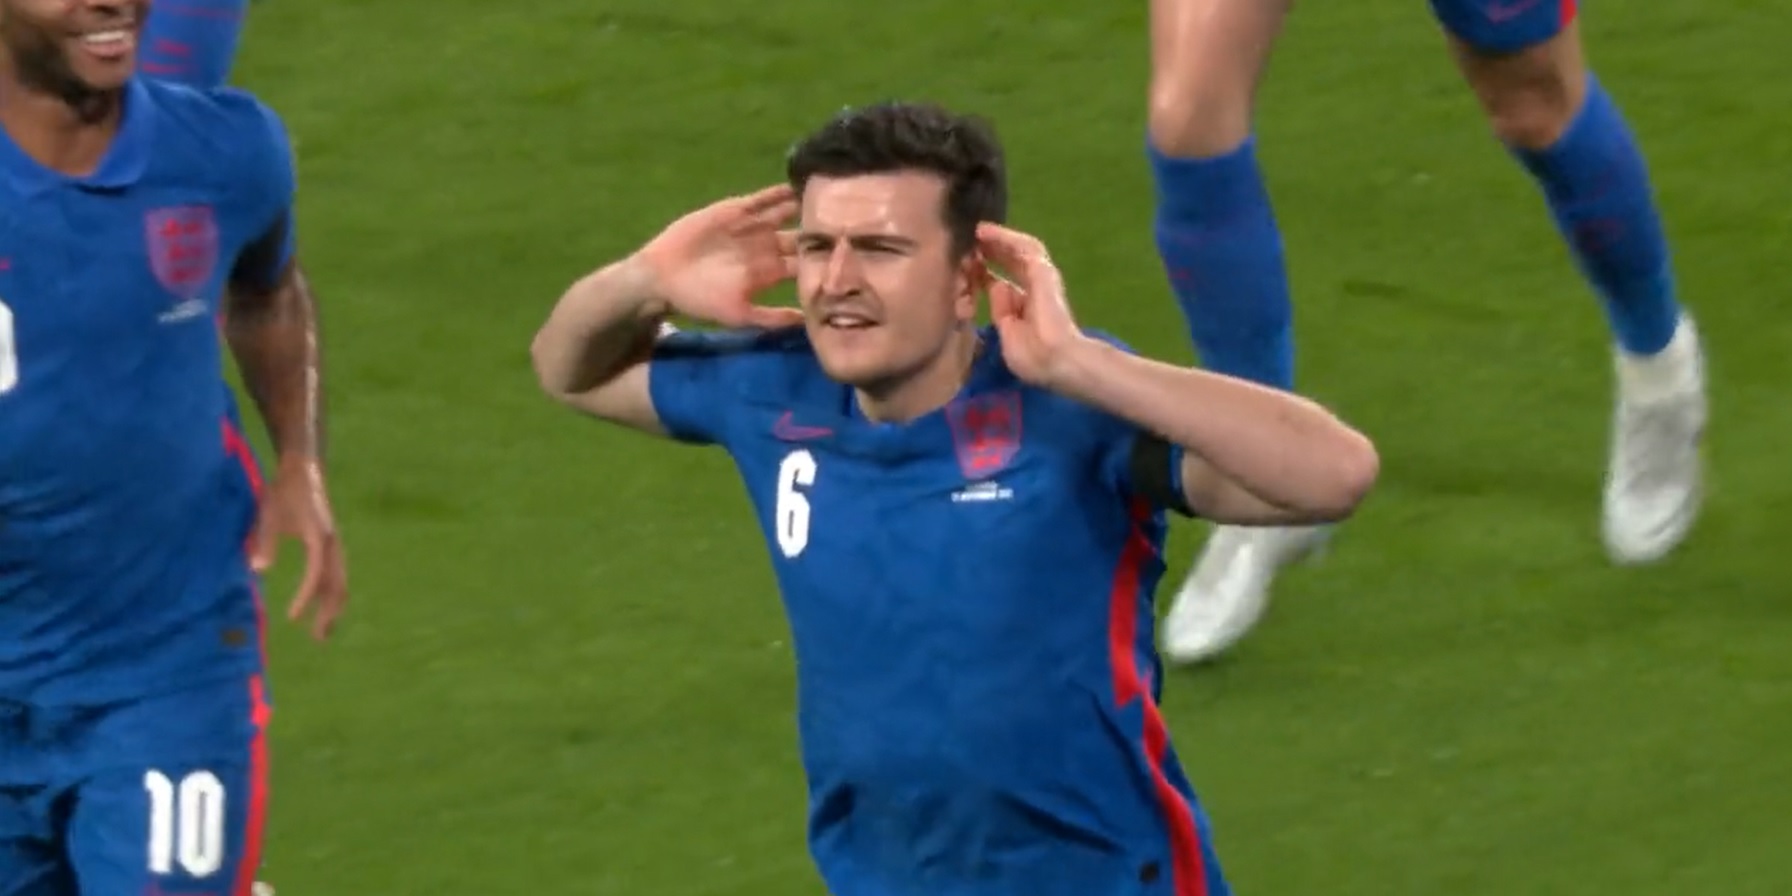 (Video) More discord for Manchester United as Roy Keane slams ’embarrassing’ Maguire’s England celebration